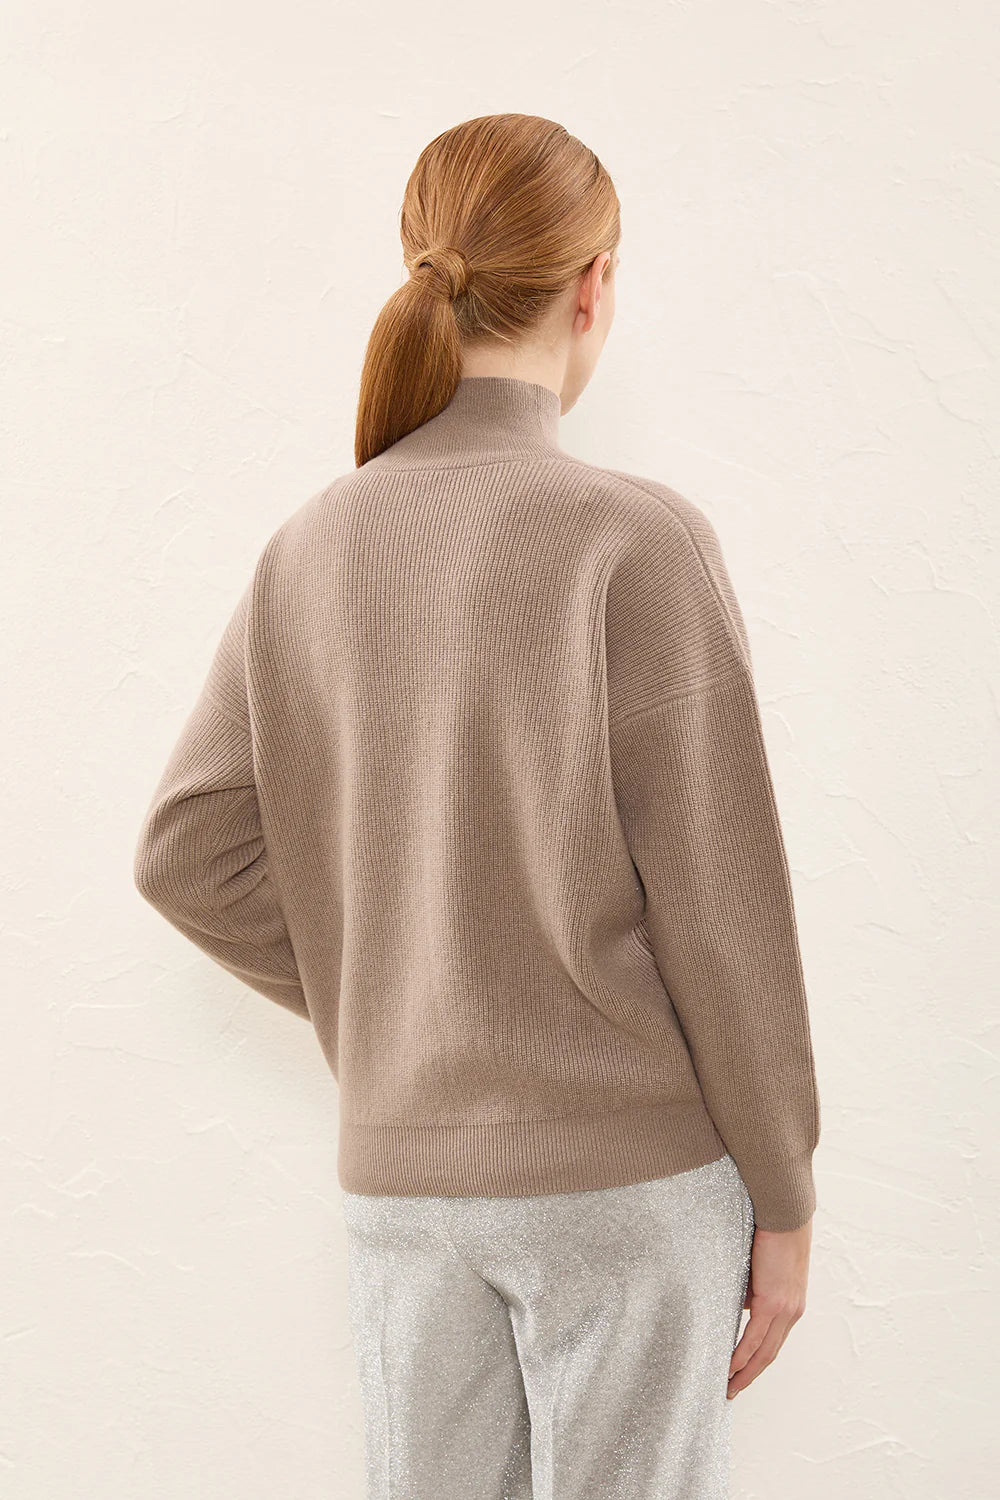 Wool, silk and cashmere sweater with high collar - Cnidus Stone